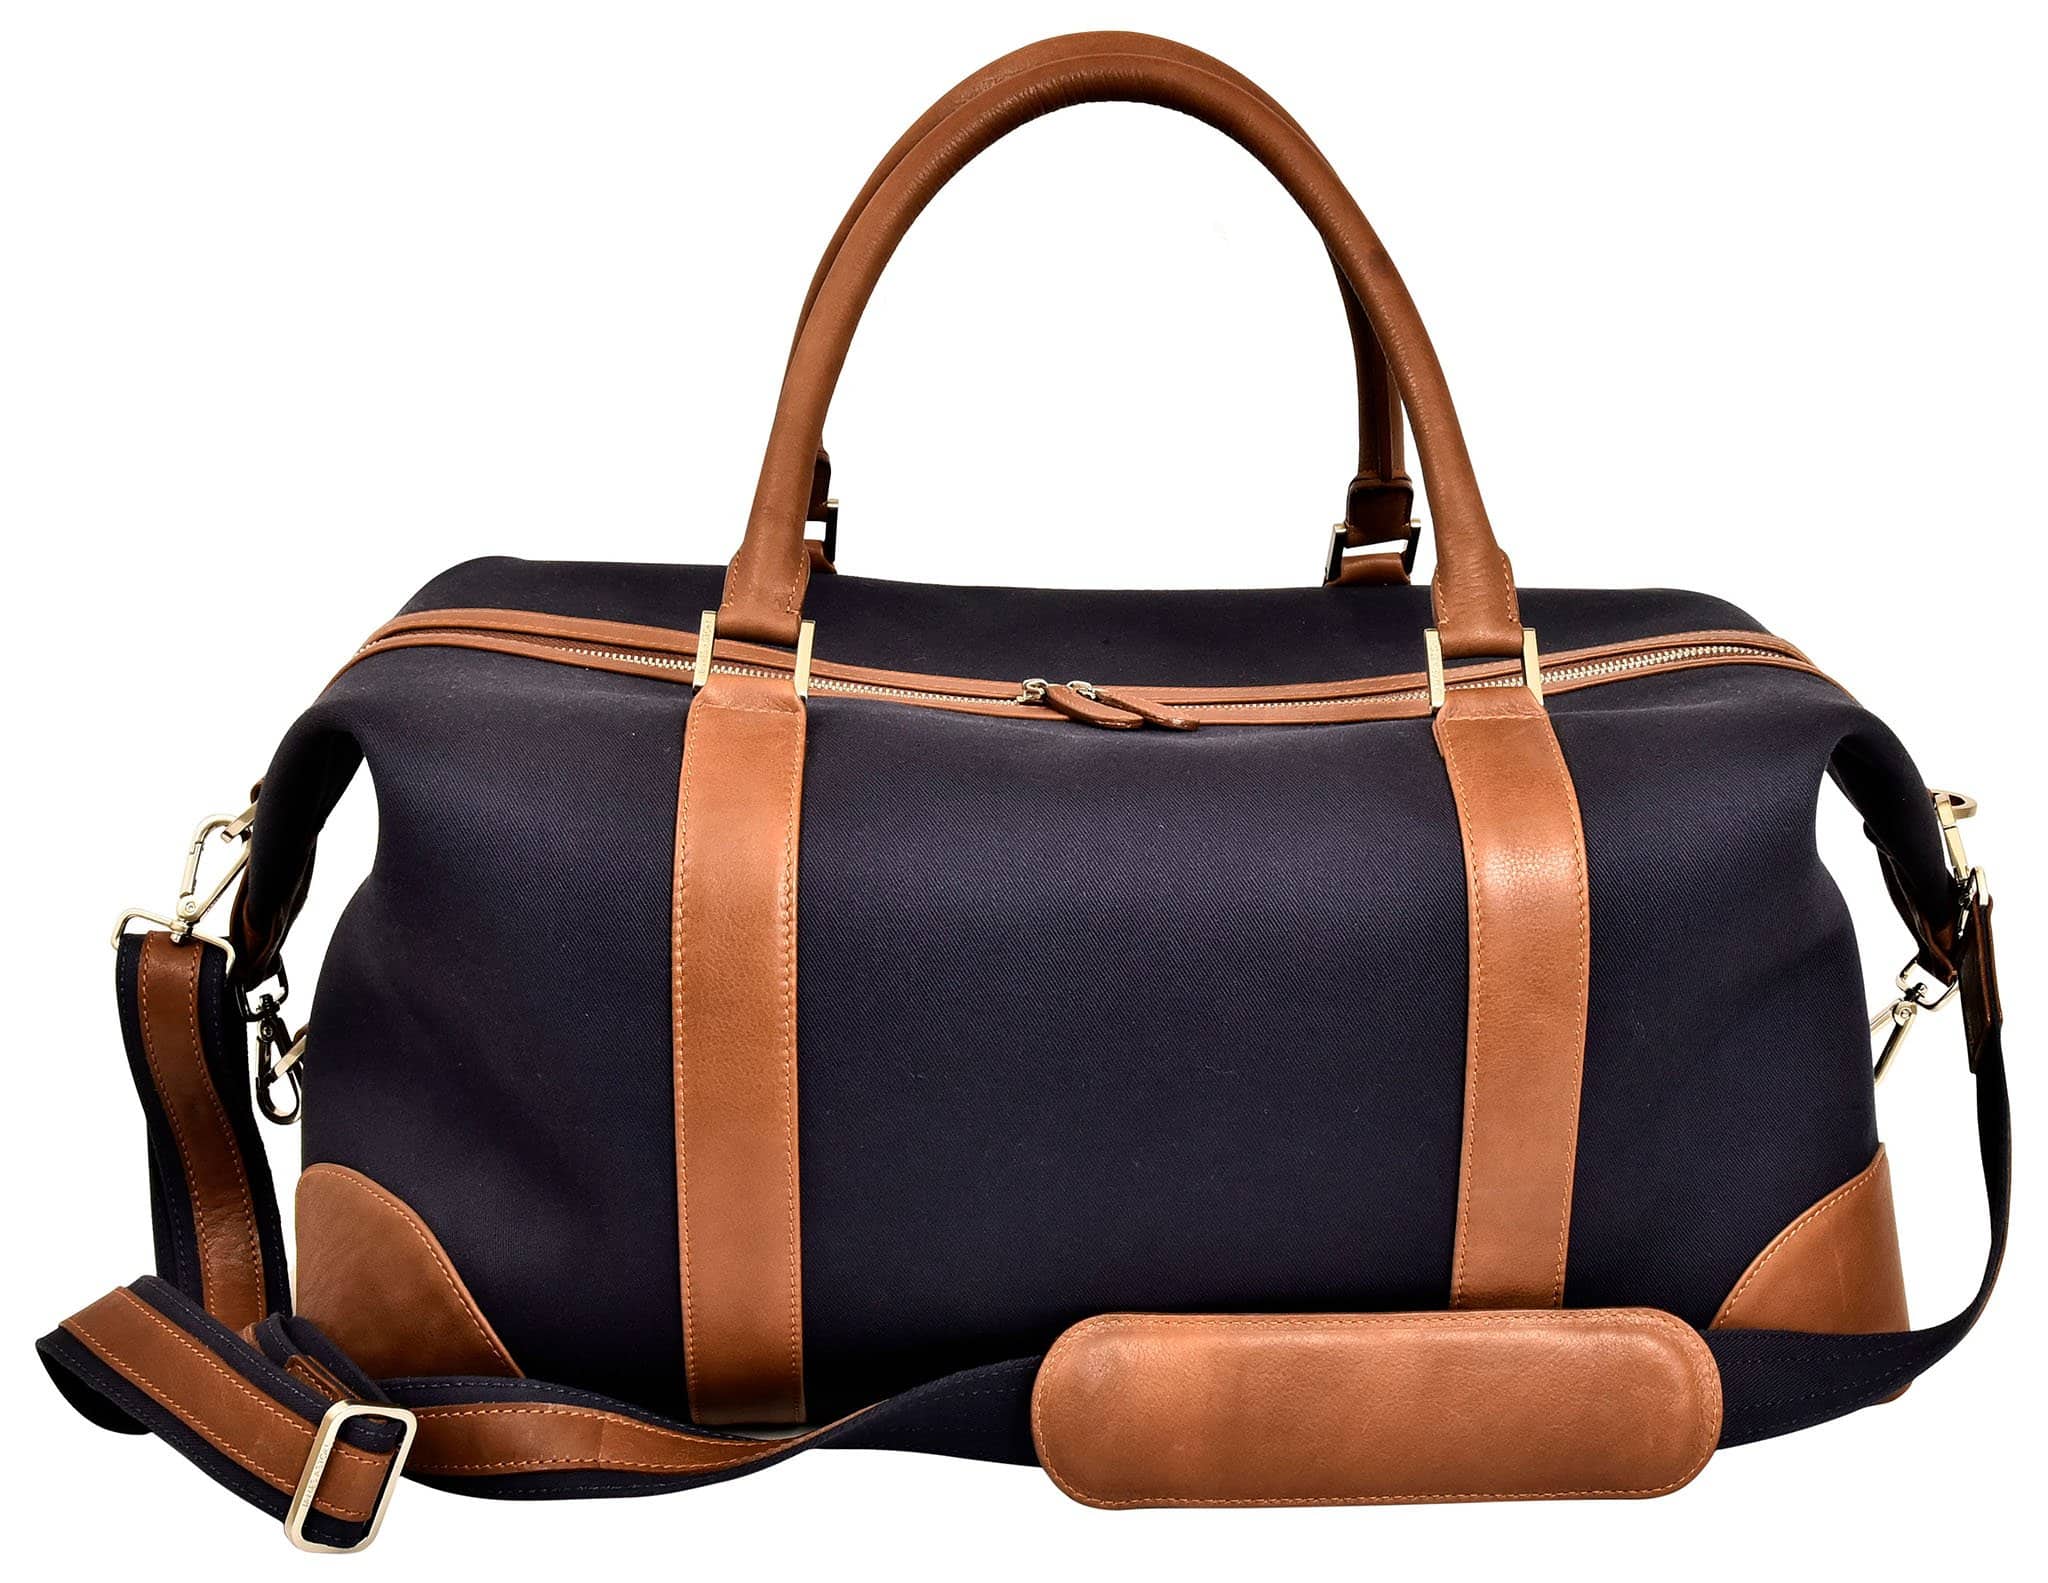 10 Best Weekender Bags to Buy in 2022 for Your Next Trip